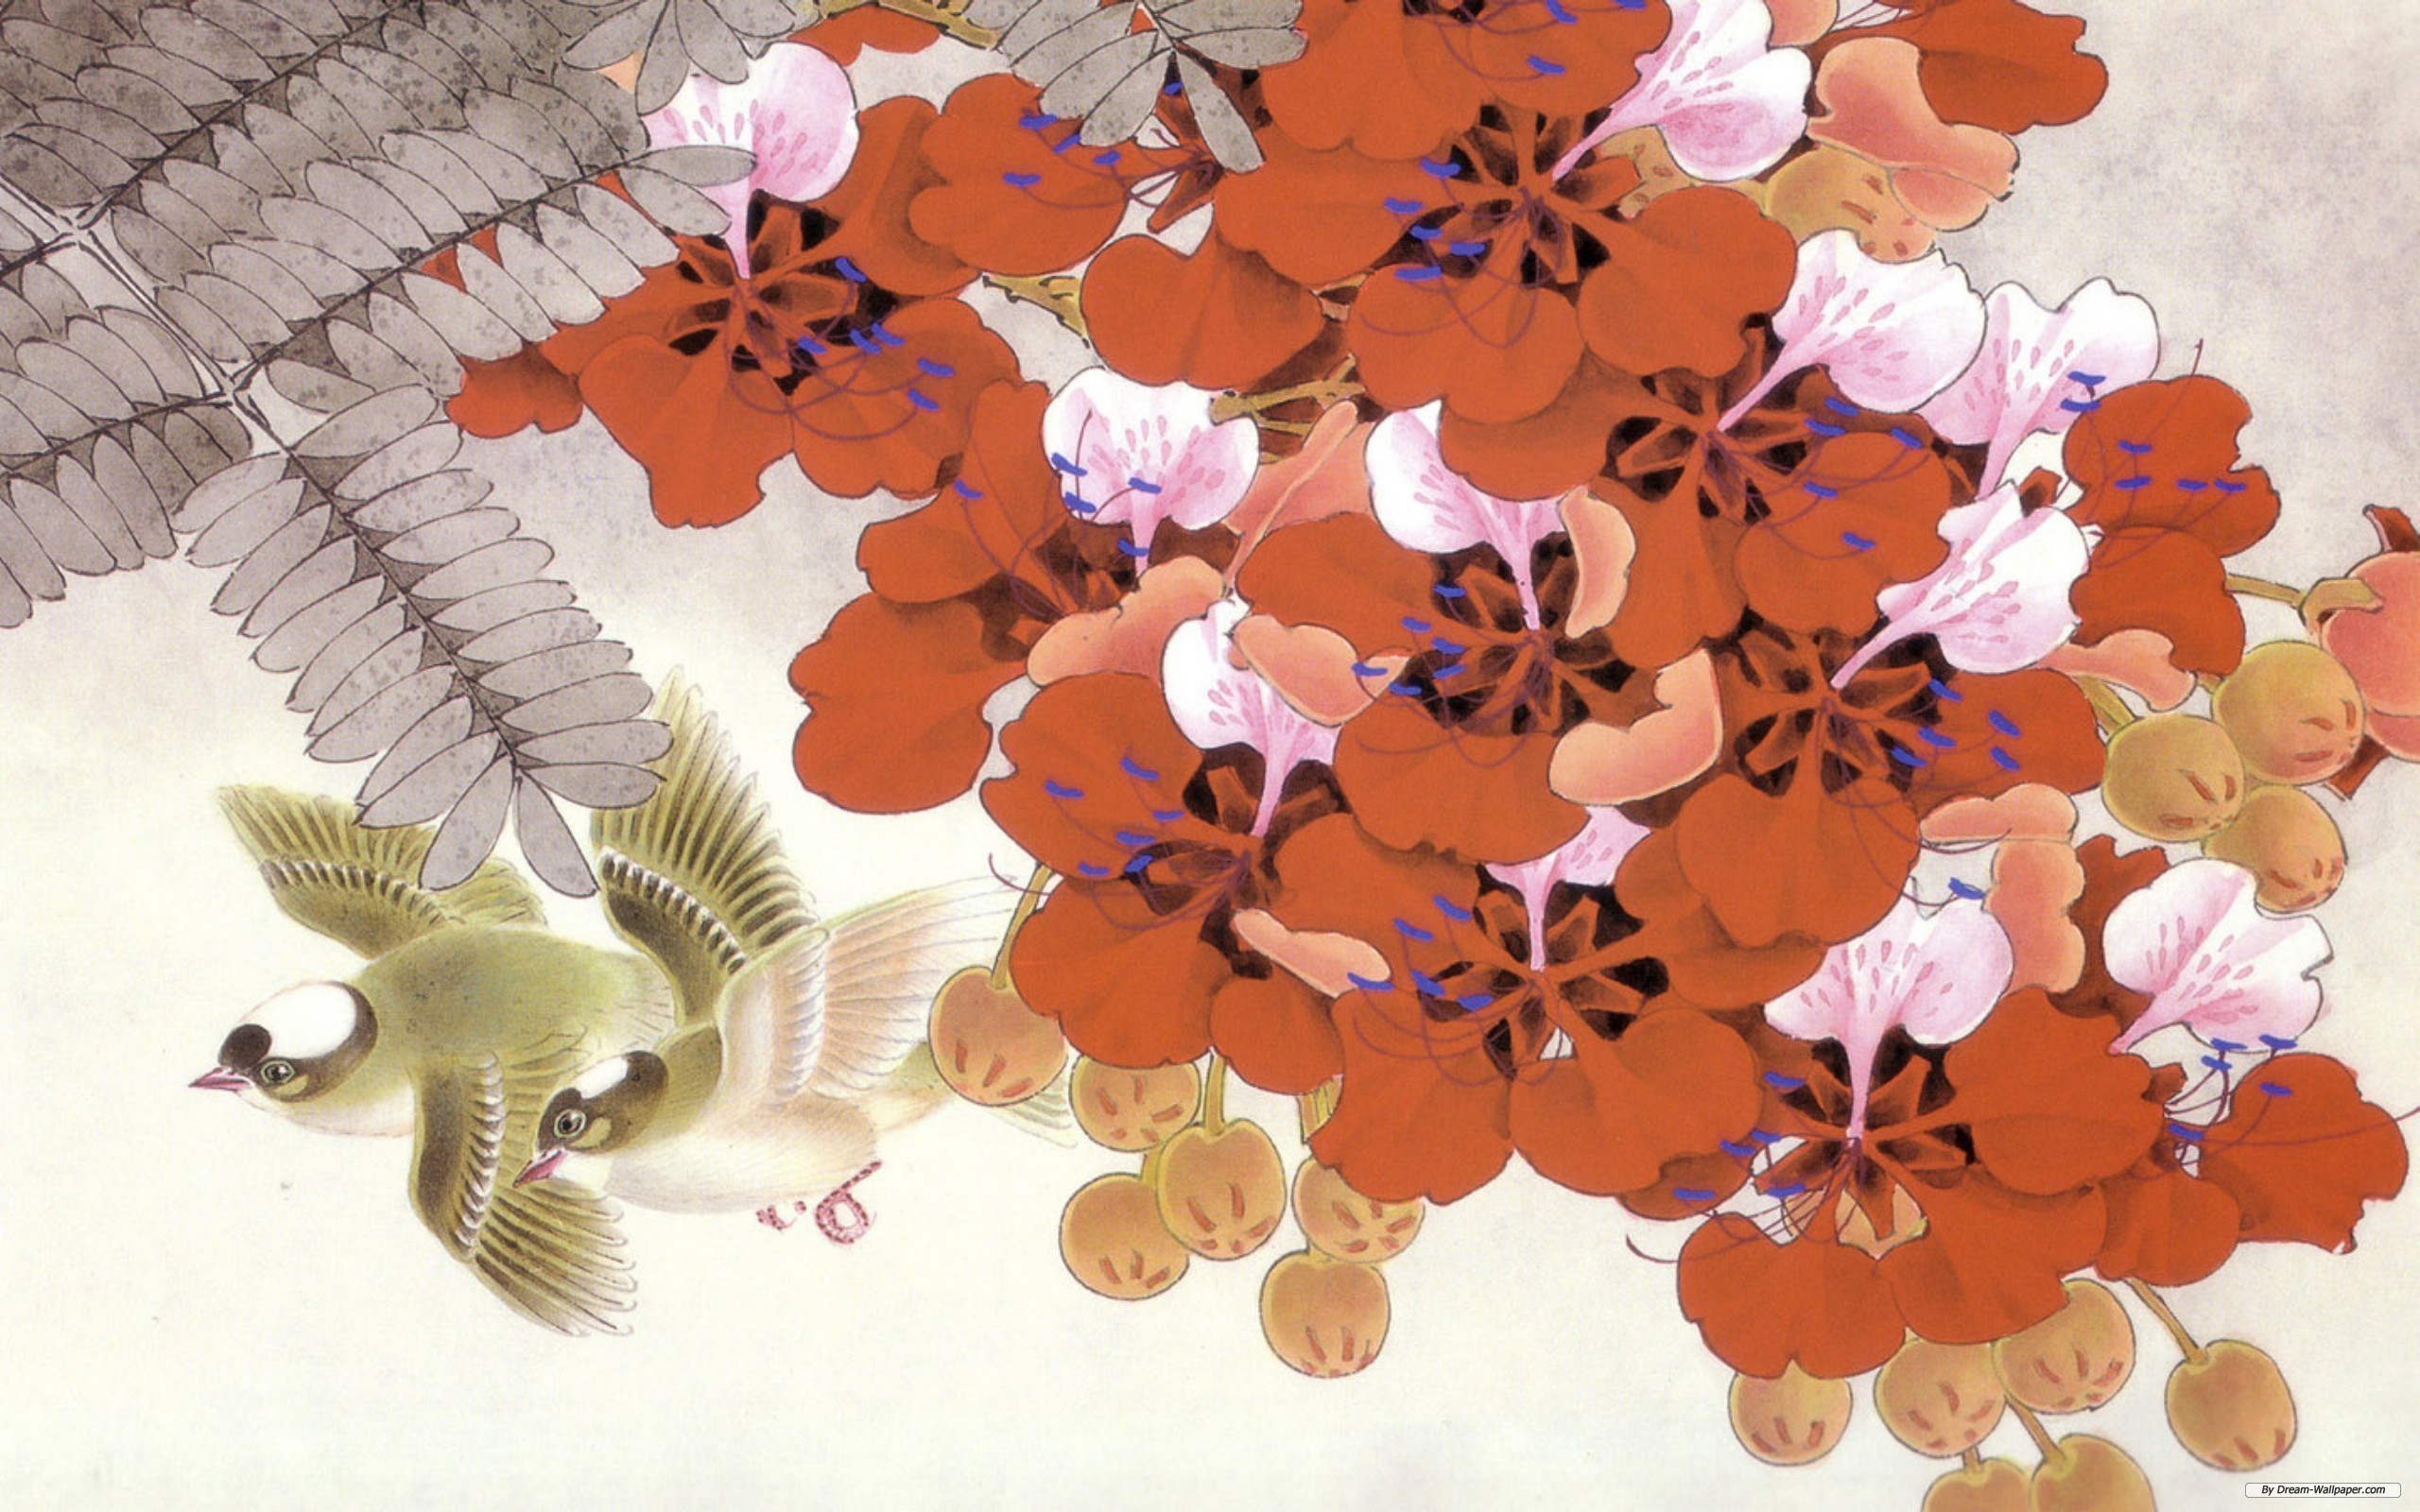 Birds among red flowers, Japanese painting